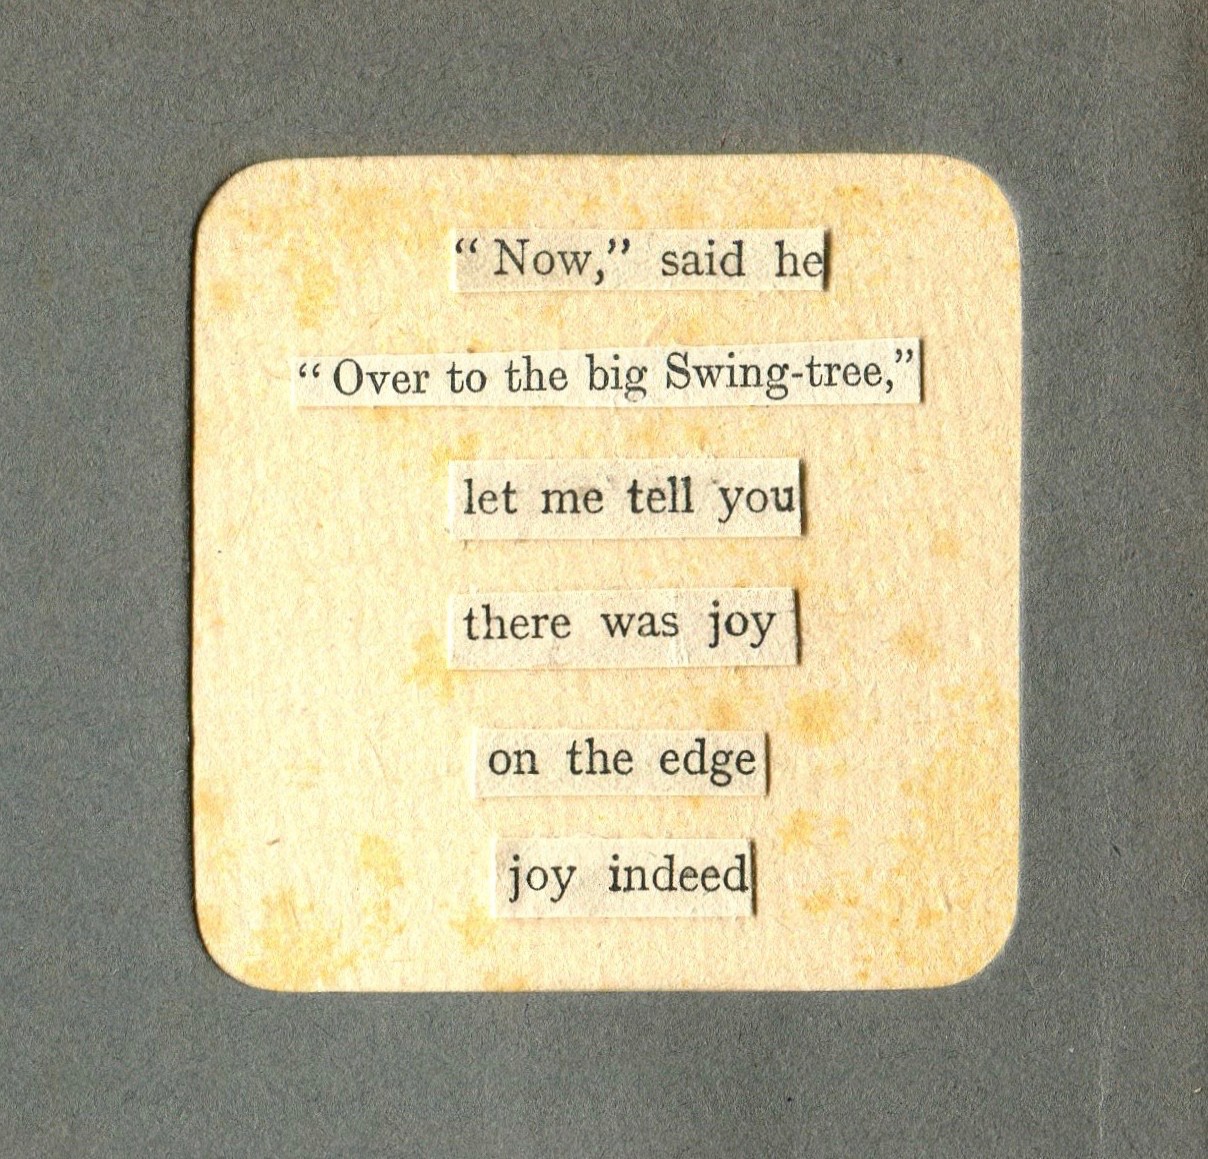 collage poem in a rounded corner square frame with words that say now said he over to the big swing-tree
        			let me tell you there was joy on the edge joy indeed